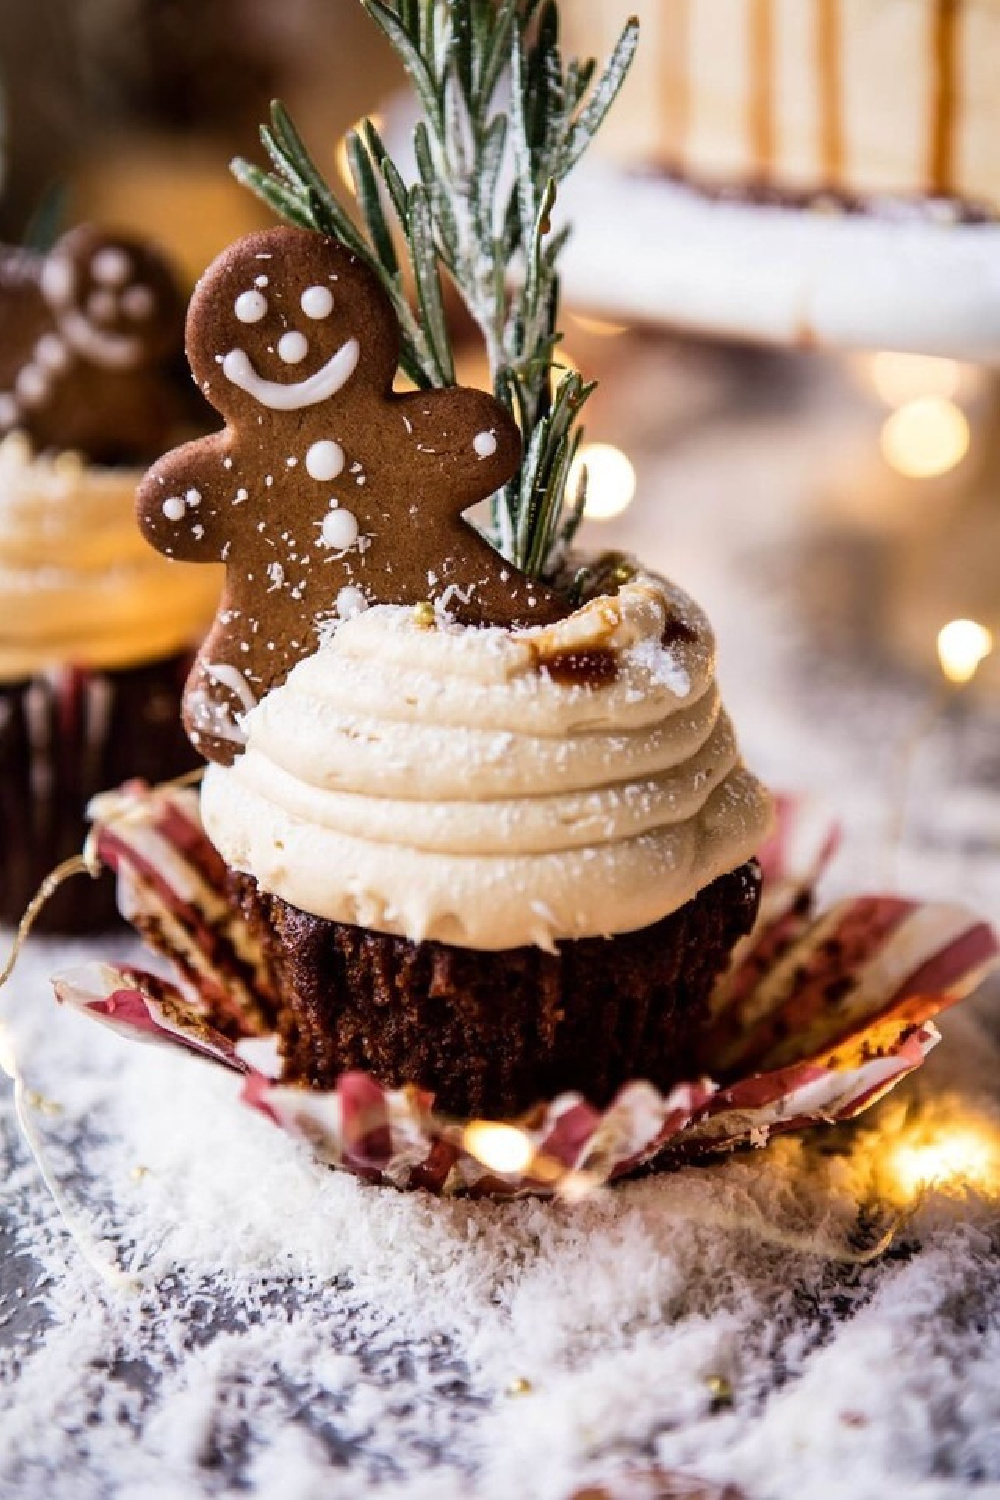 Gingerbread cupcakes decorated for holidays - AllThingsChristmasandWinter. #cozychristmas #christmasbaking #gingerbread